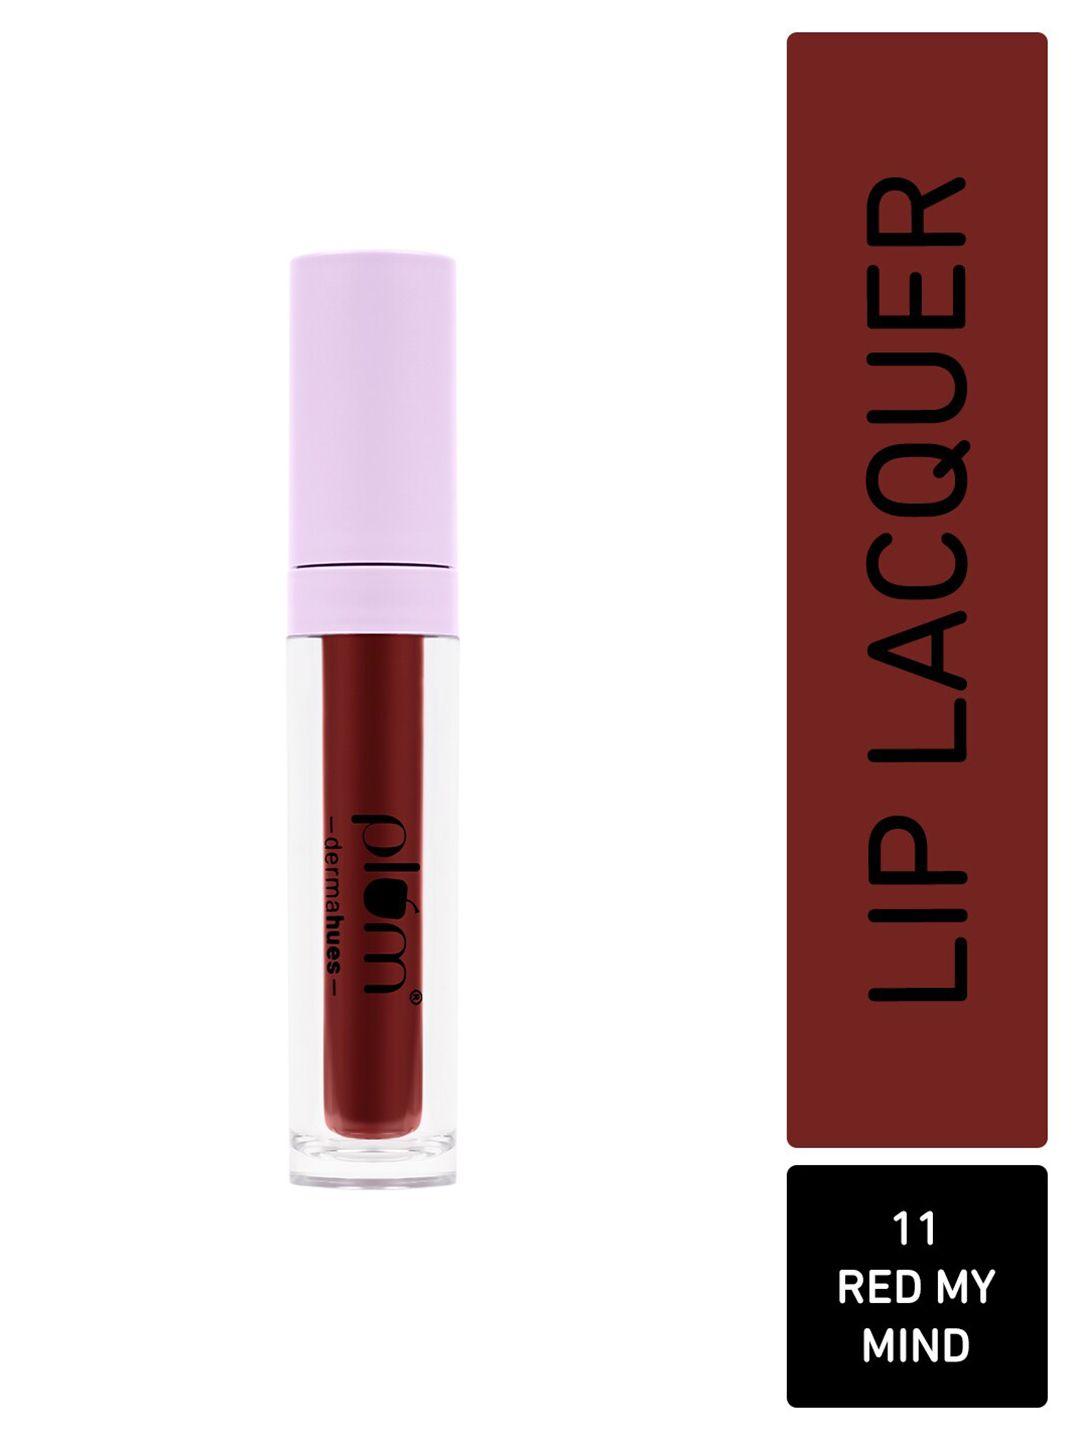 plum glassy glaze 3-in-1 velvety smooth lip lacquer with jojoba oil 4.5ml - red my mind 11